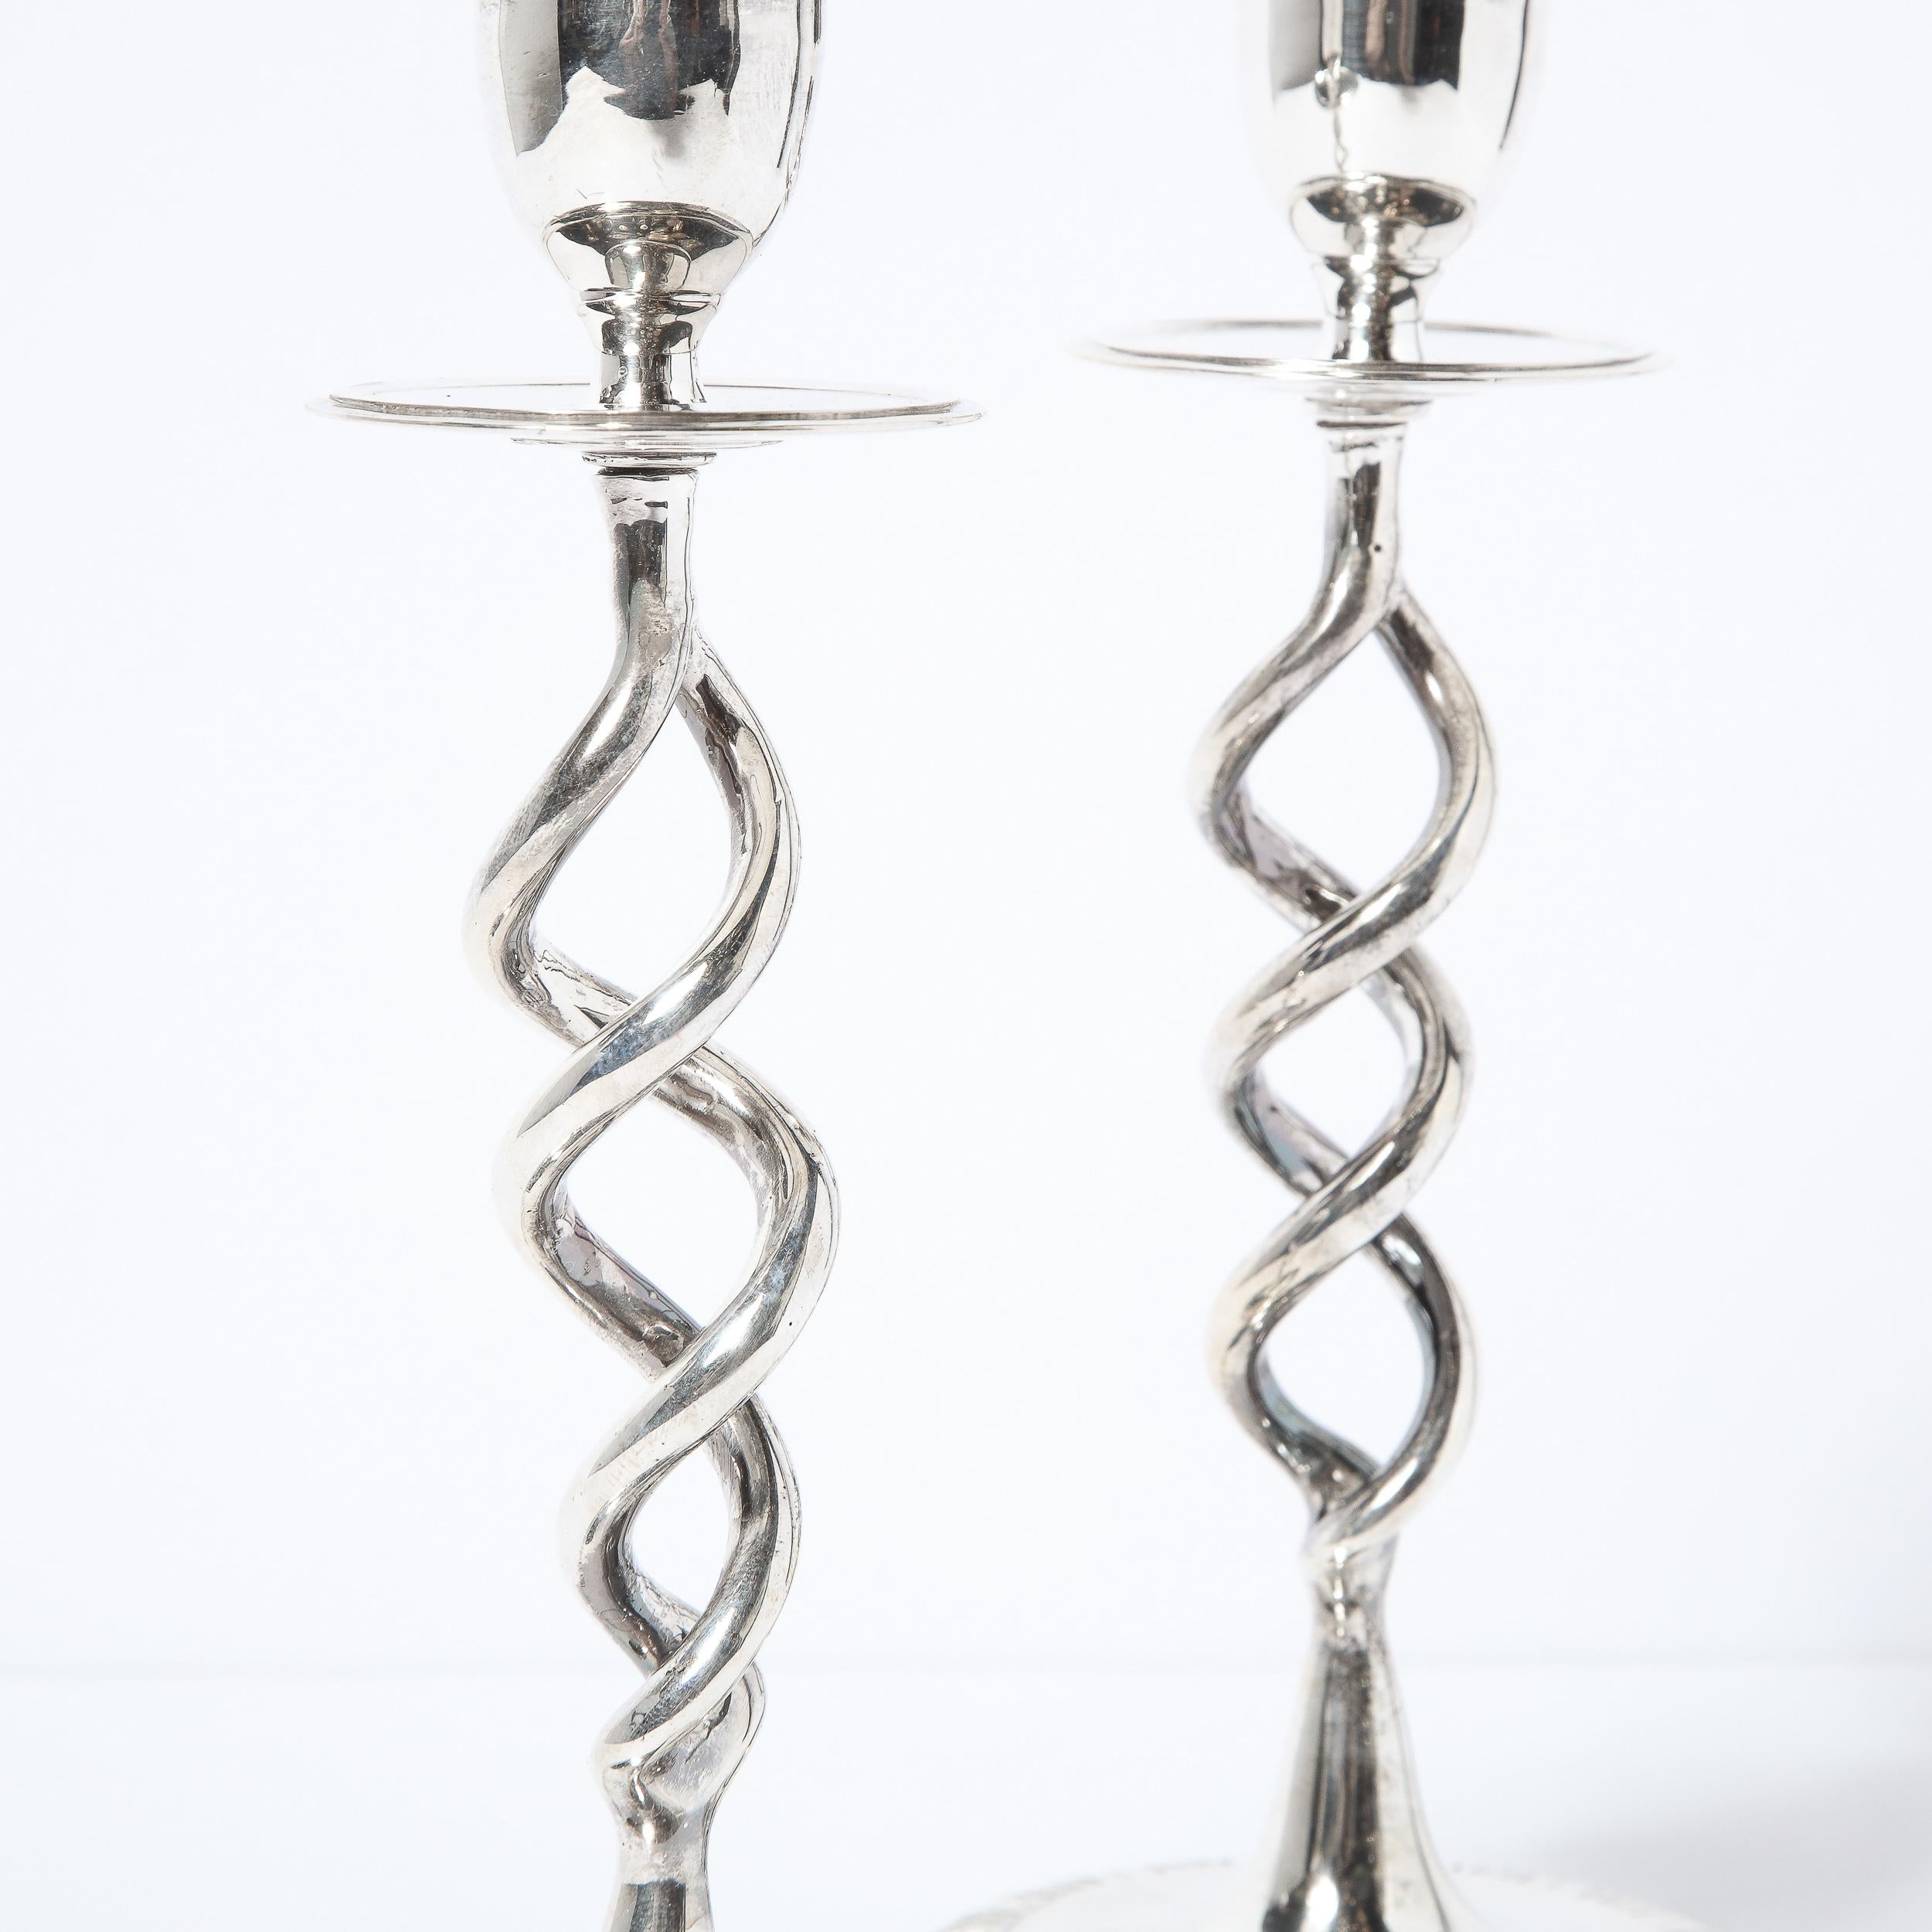 Mid-20th Century Pair of British Mid-Century Modern Nickel Helix Form Candle Holders For Sale